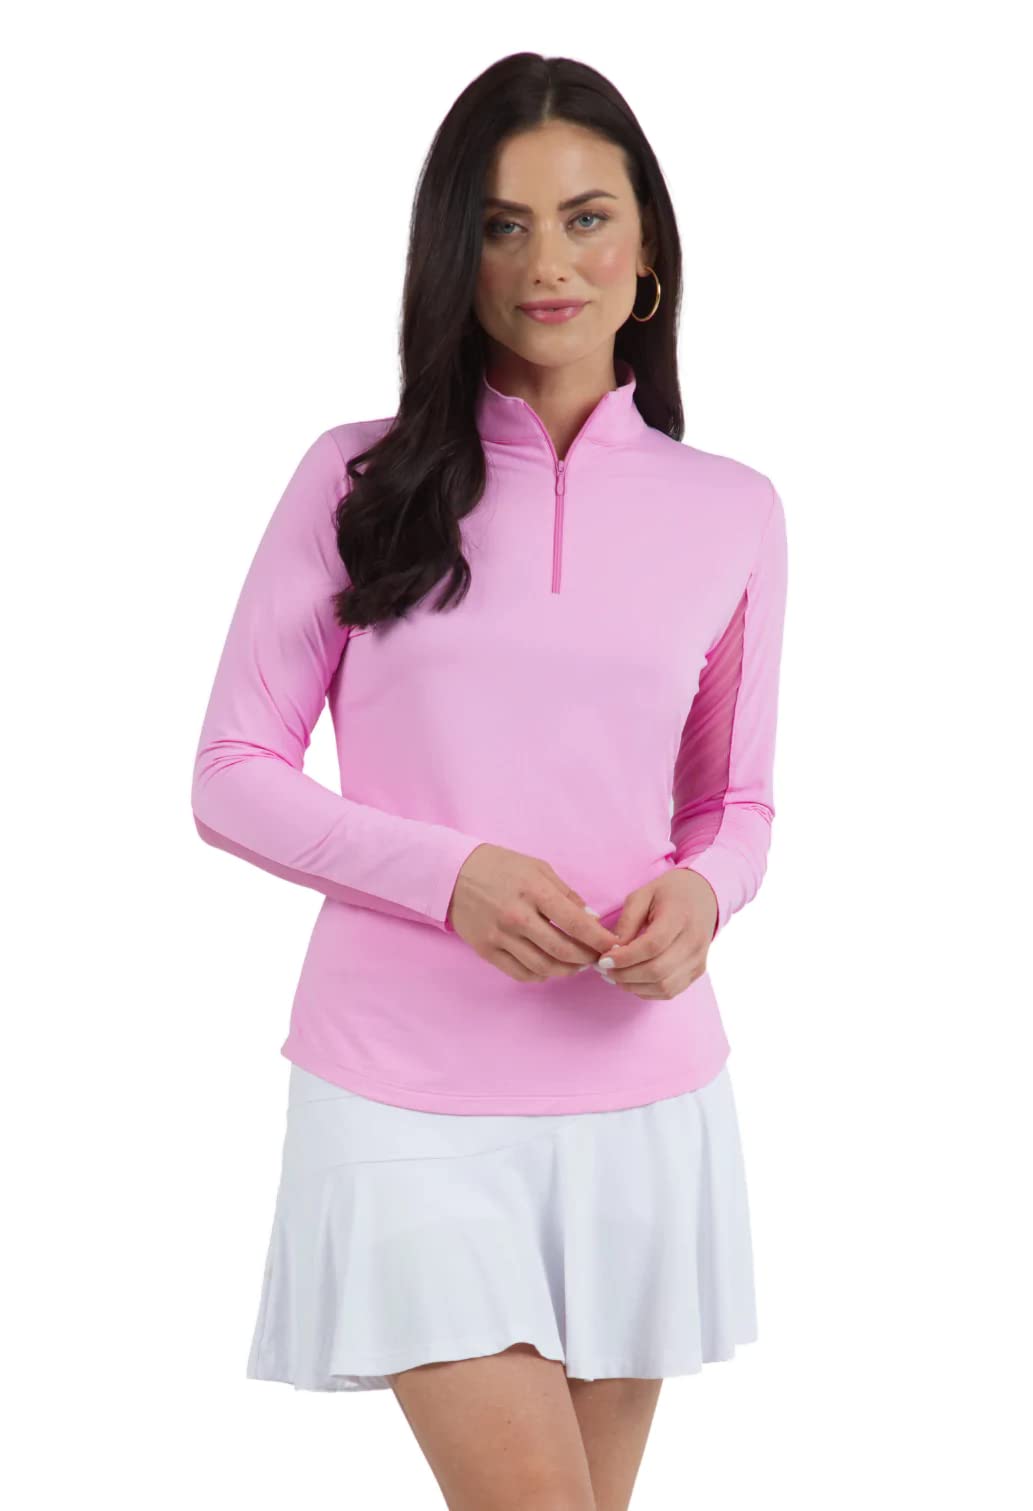 IBKUL Athleisure Wear Sun Protective UPF 50+ Icefil Cooling Tech Long Sleeve Mock Neck Top with Under Arm Mesh 80000 Watermelon Solid S